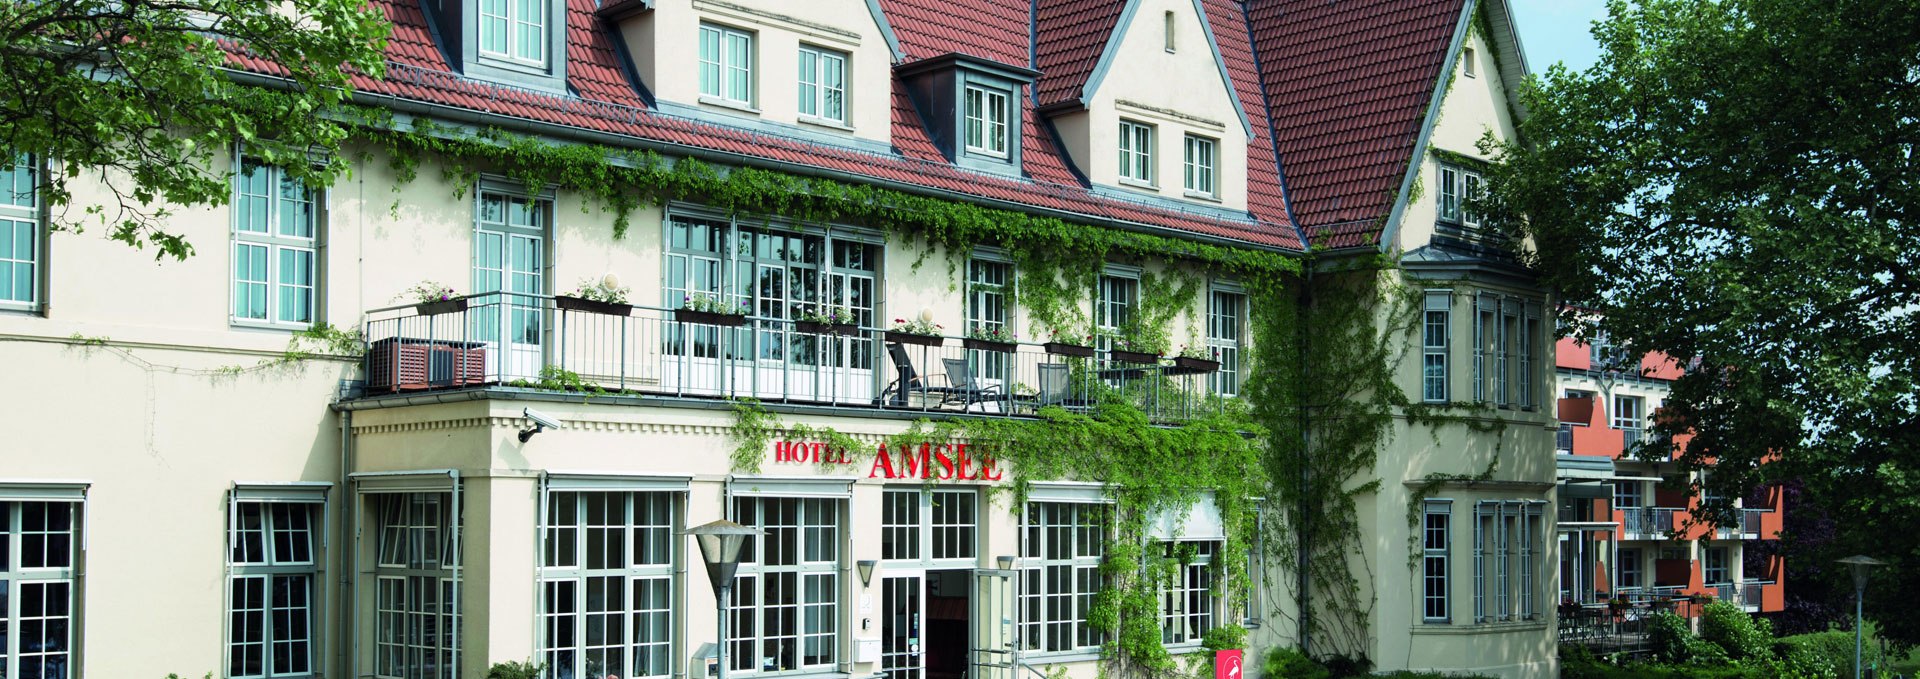 Exterior view of the main building Amsee, © Hotel Amsee GmbH